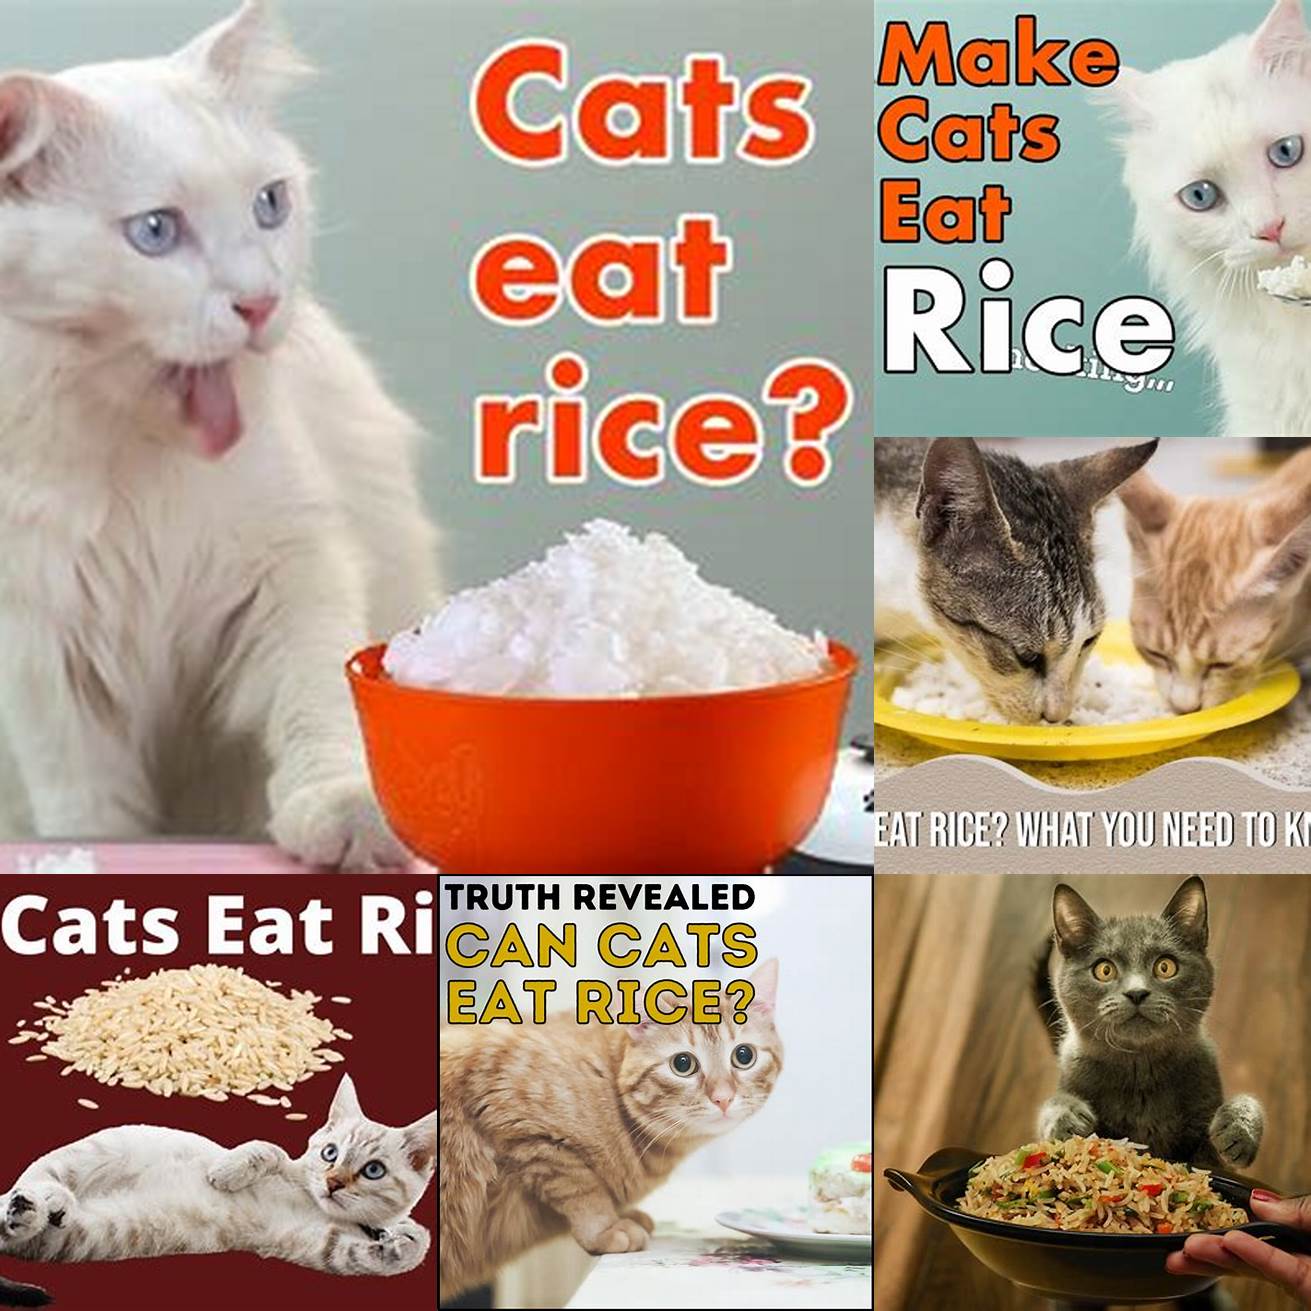 Q Can cats eat rice